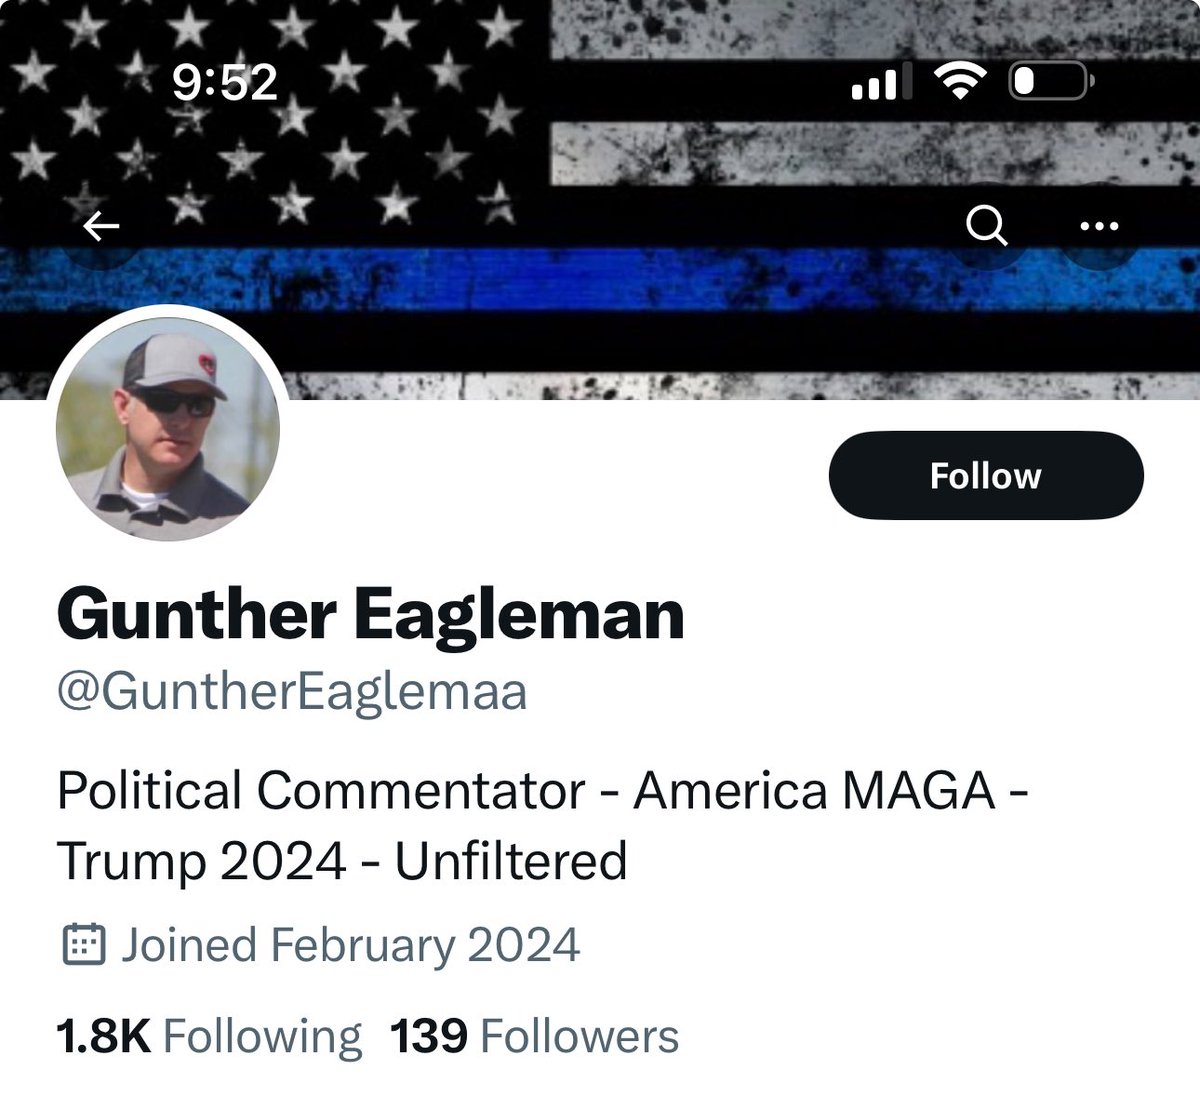 🚨FYI… This account @GuntherEaglemaa is NOT me! Block and report if you have a second.